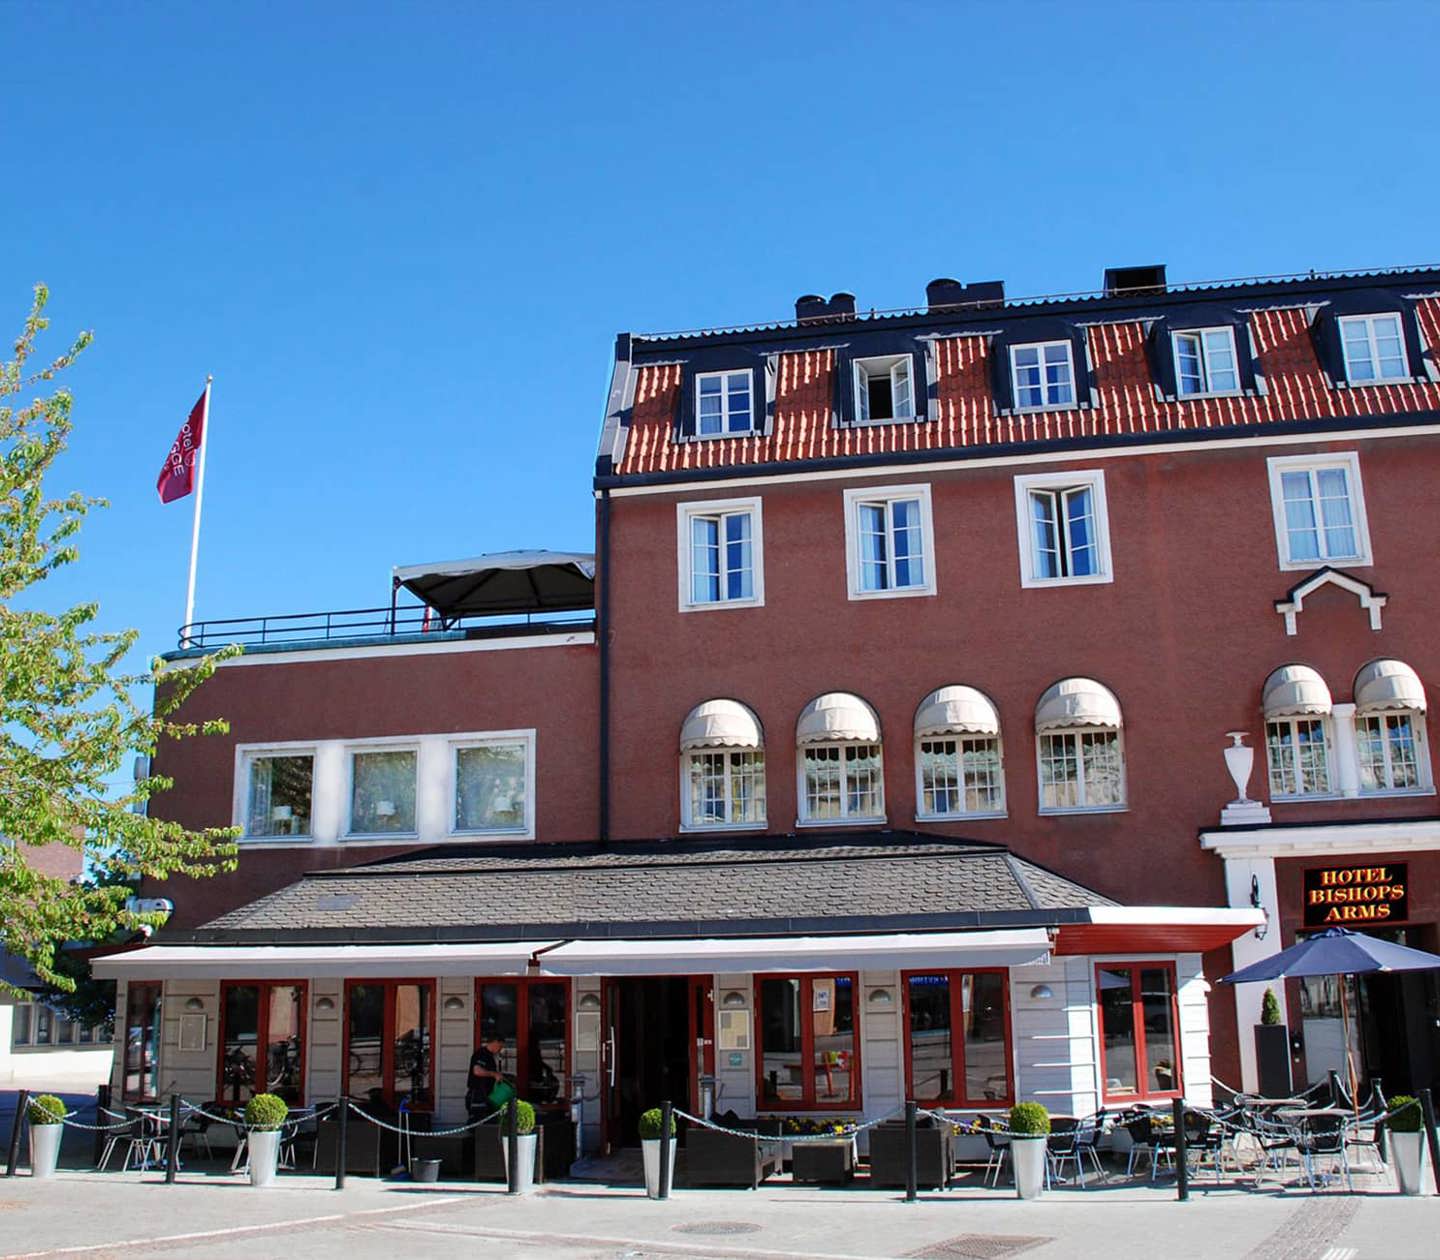 The red facade of the Hotel Bishops Arms with outdoor seating outside